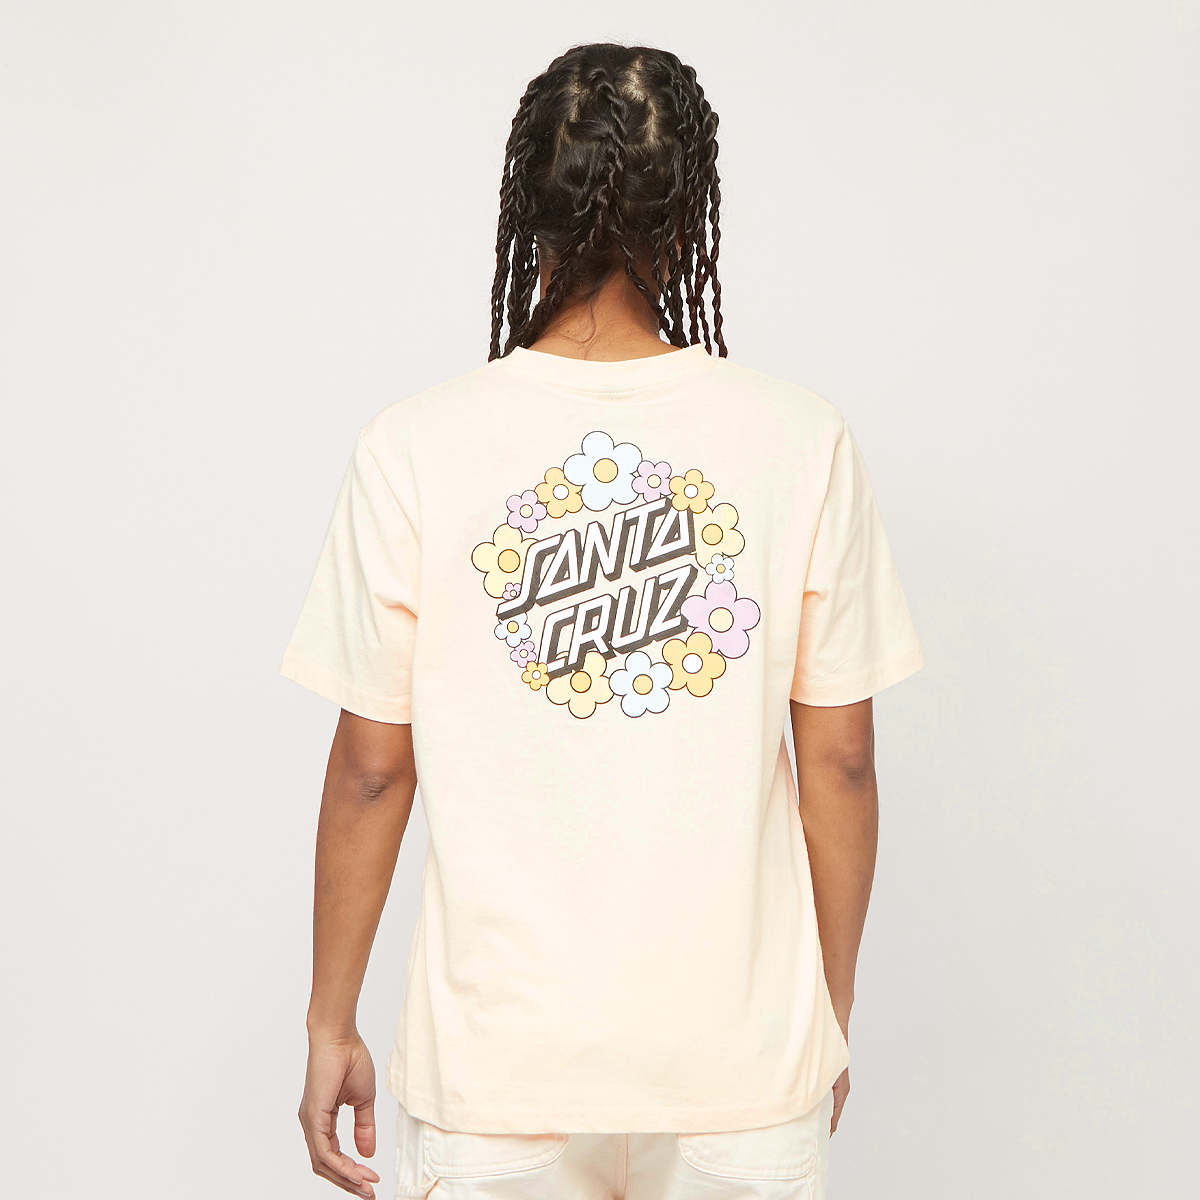 Productafbeelding: Ditsy Dot T Shirt